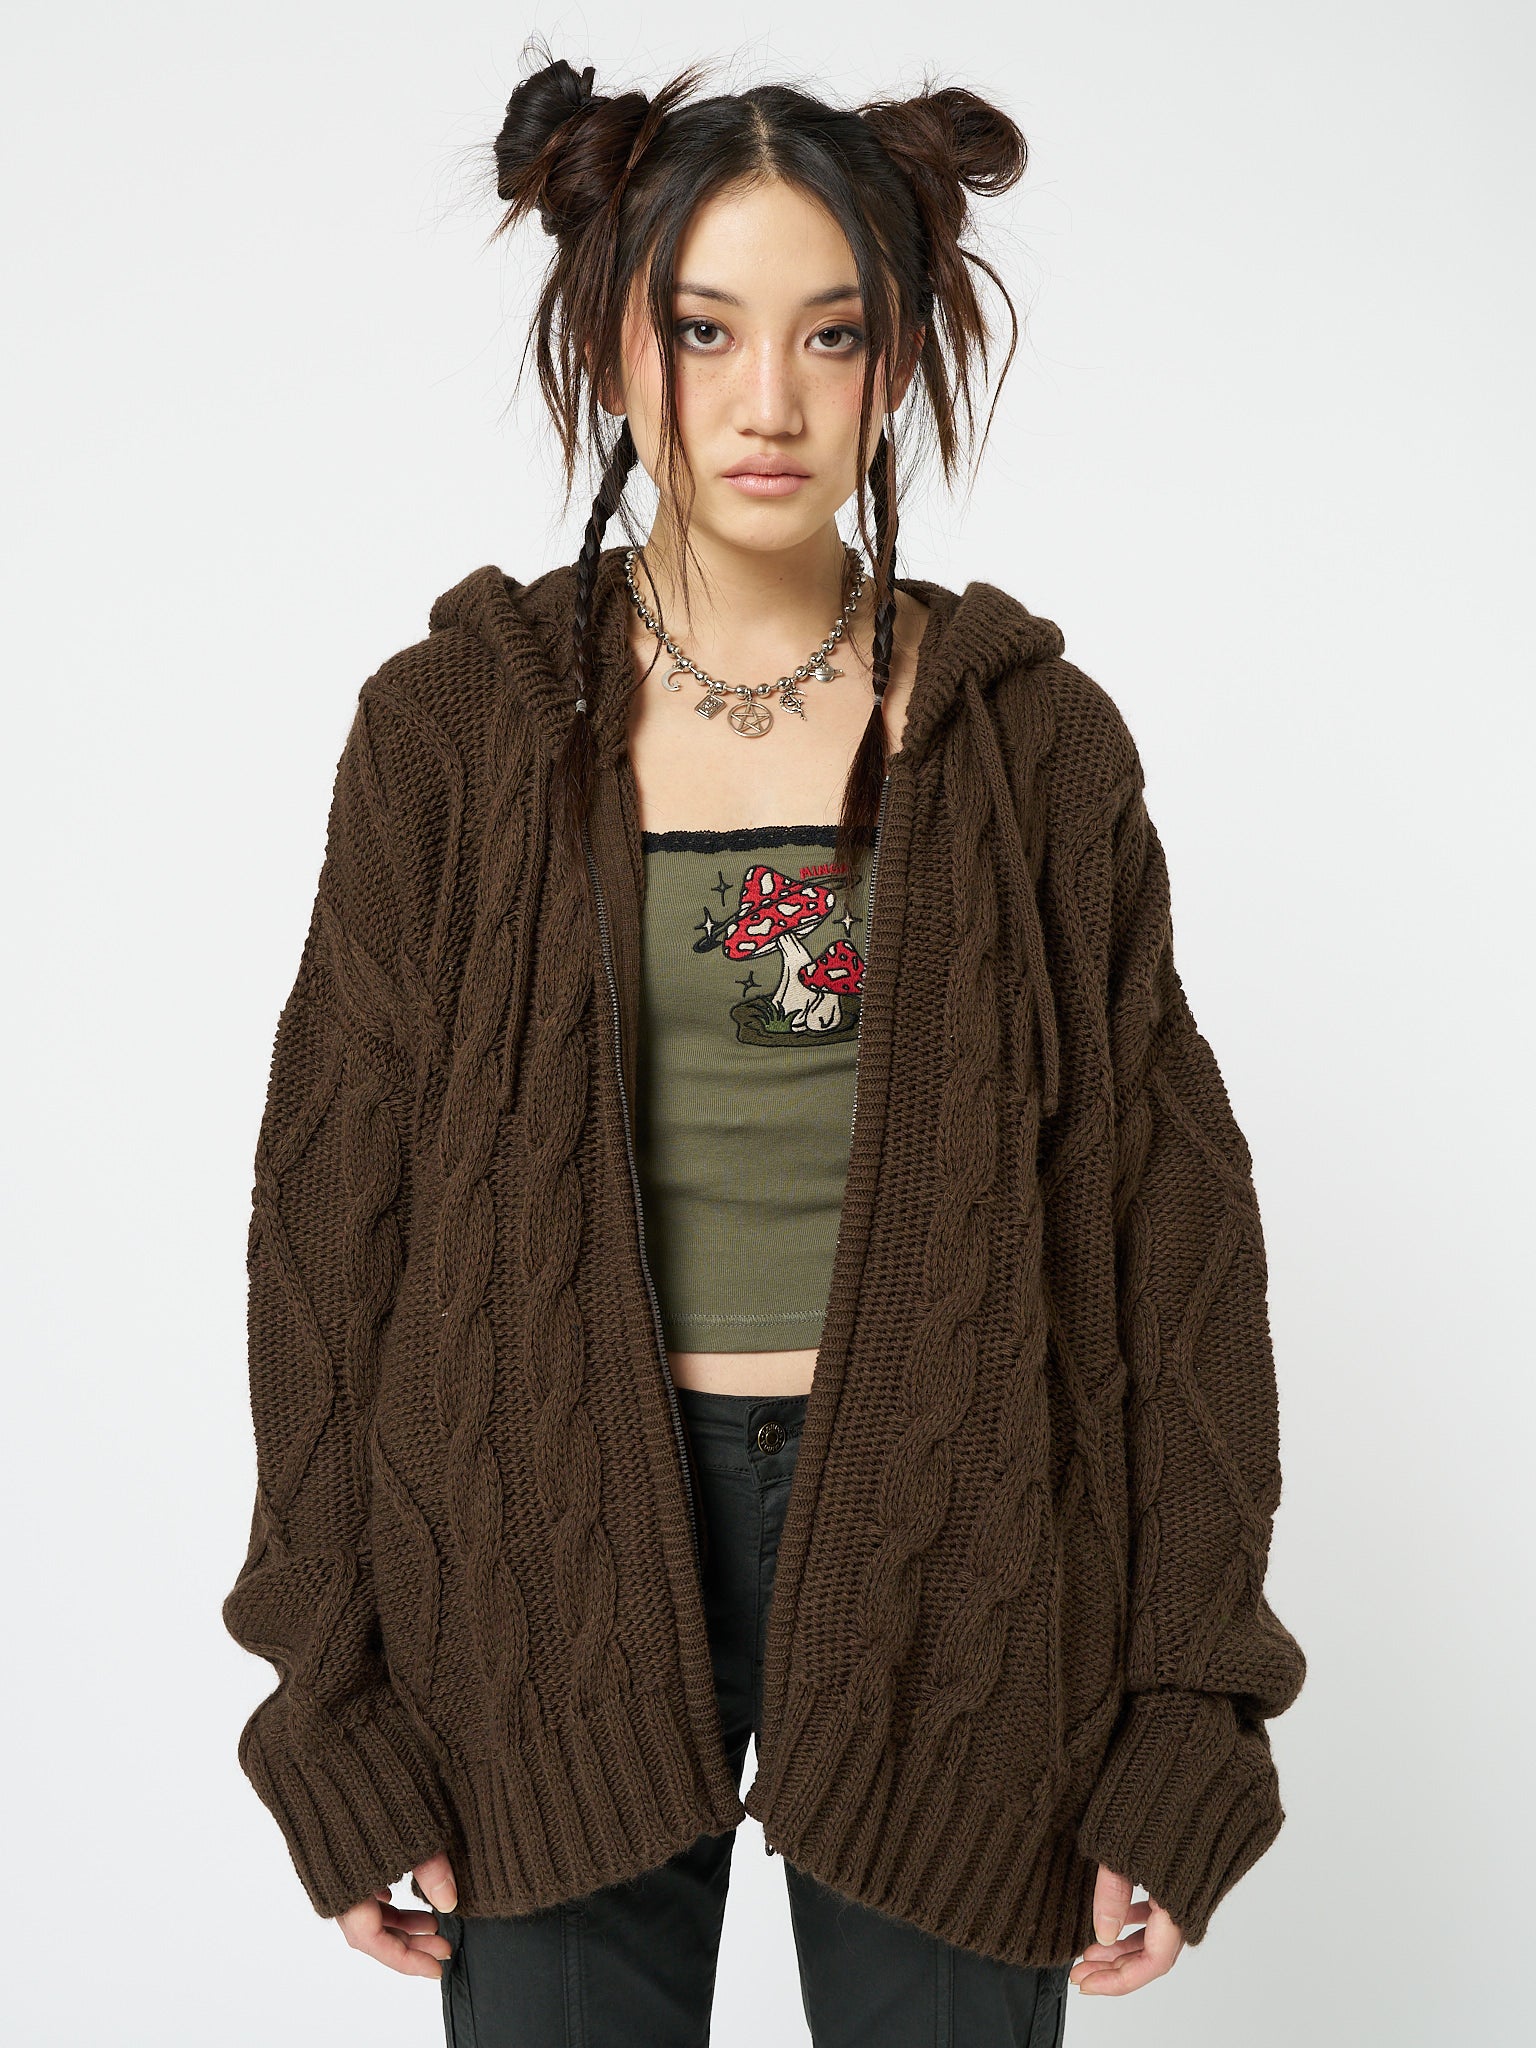 Brown cable knit cardigan named Eli by Minga London, featuring a cozy and stylish zip-up design for a fashionable and comfortable layering piece.